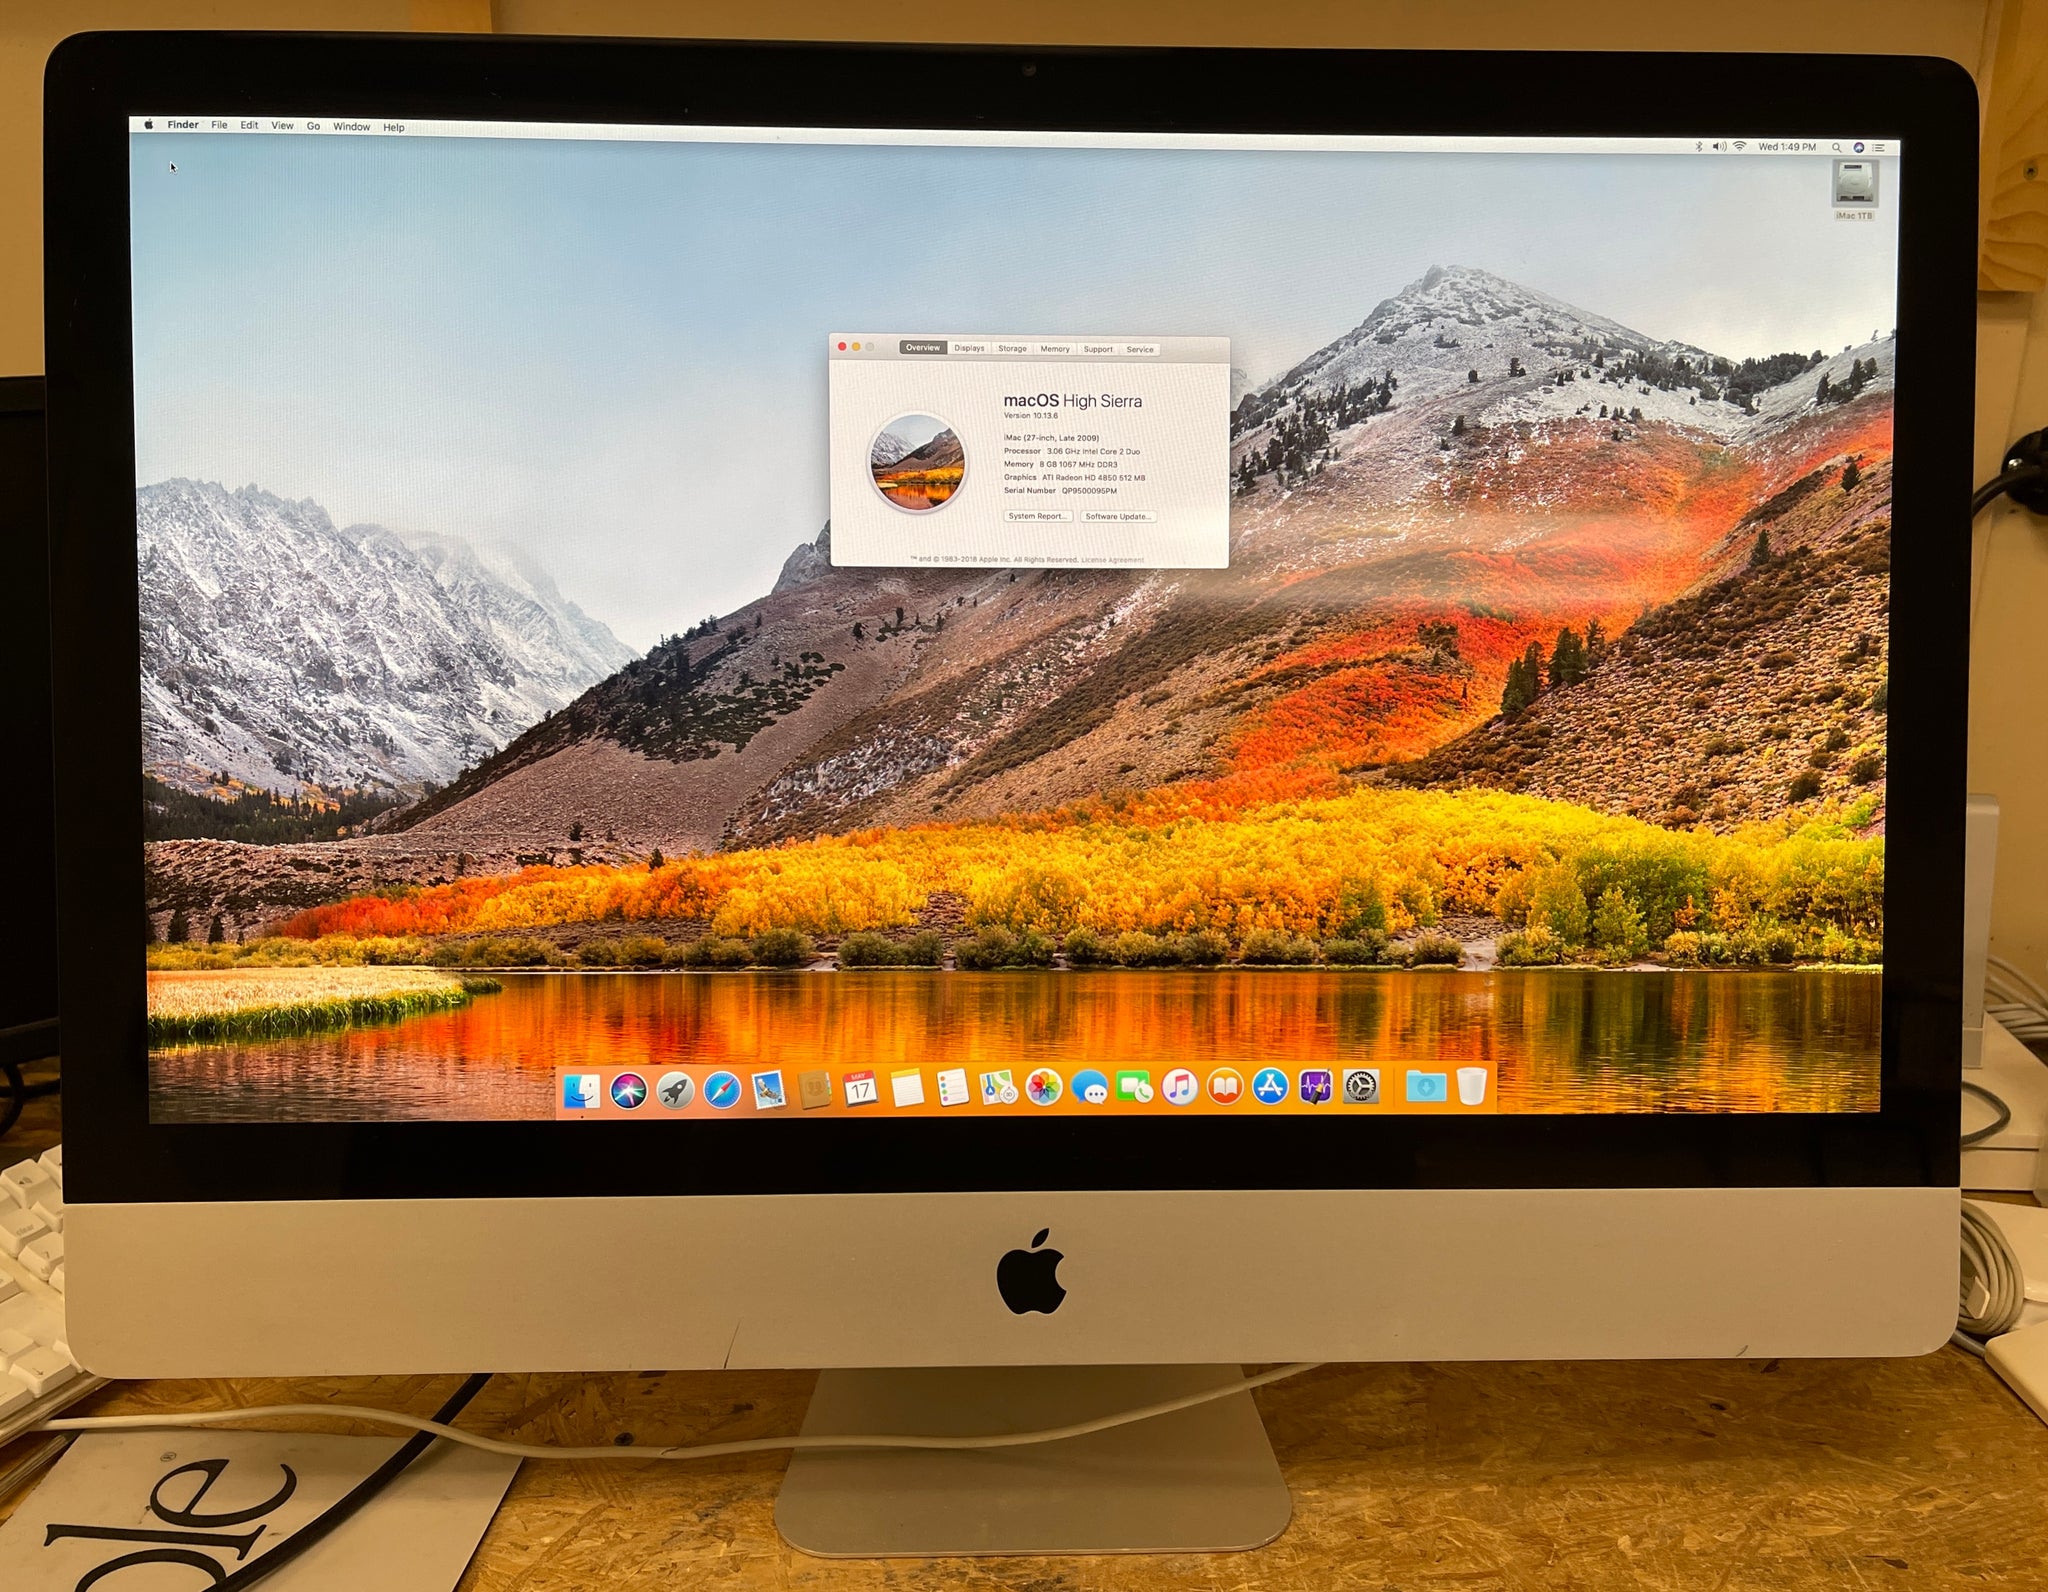 Apple iMac 21.5-inch Late 2009 3.06GHz Intel Core 2 Duo (MB950LL/A